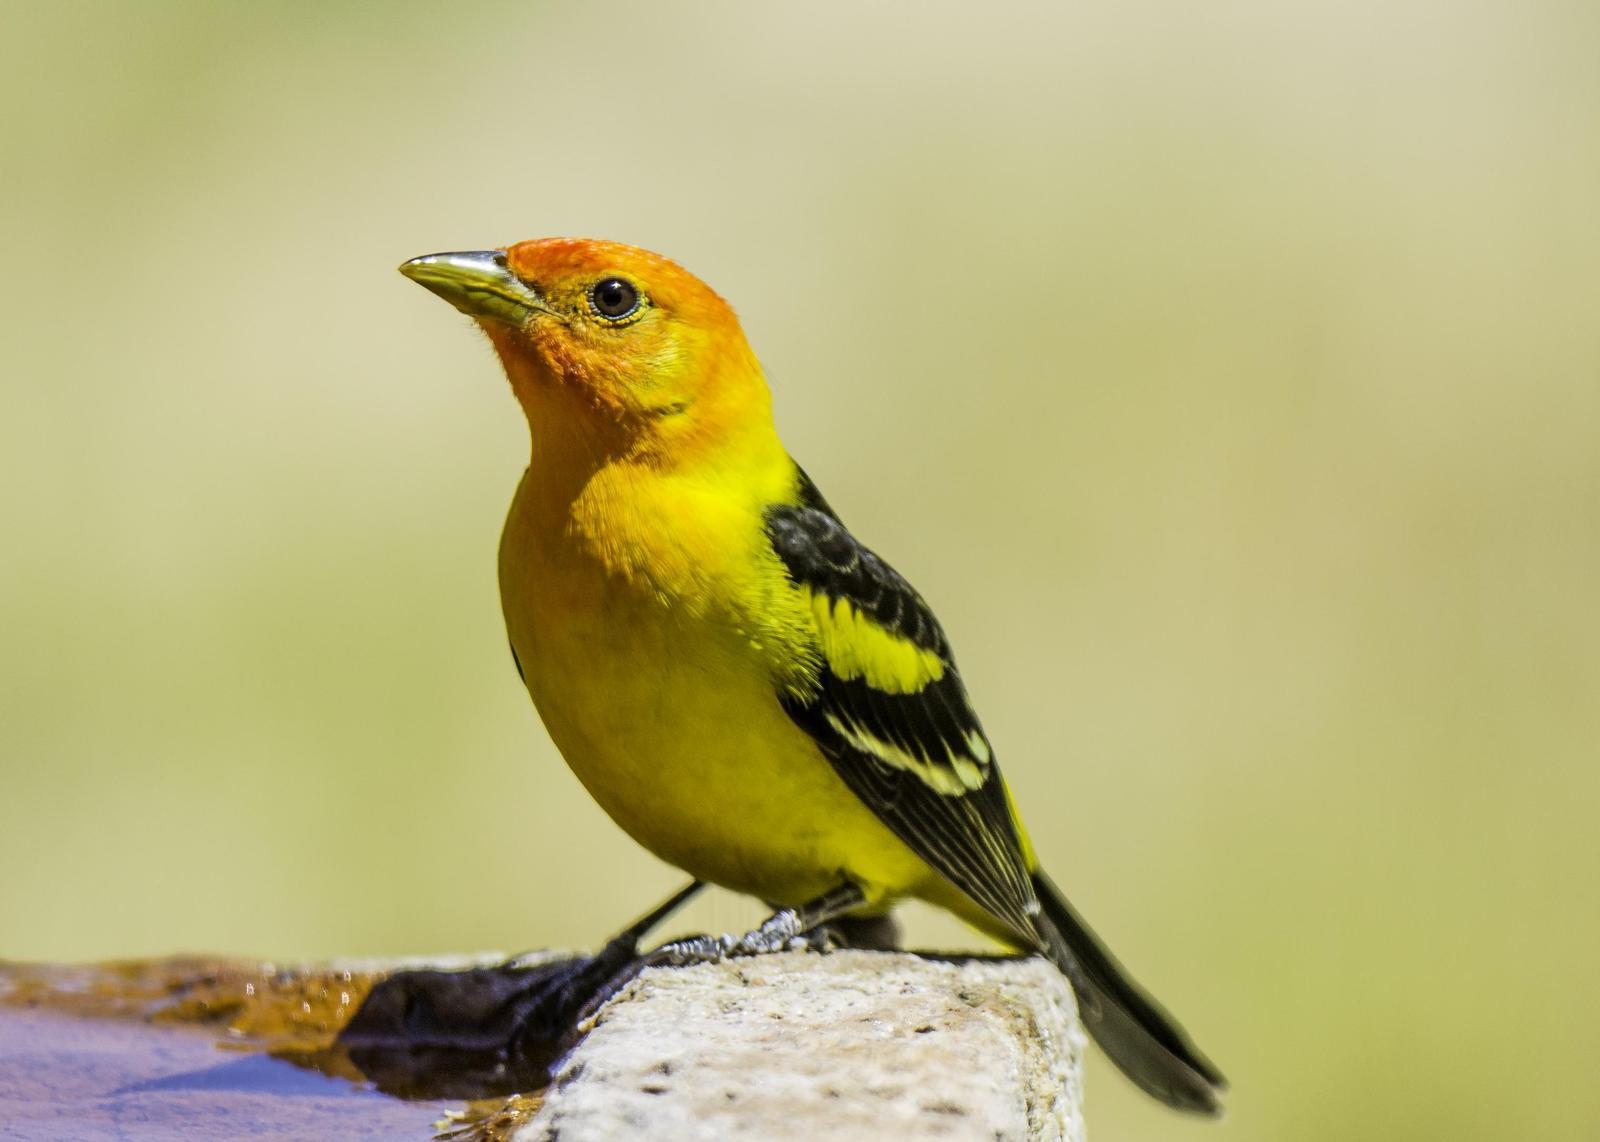 Western Tanager Photo by Mason Rose